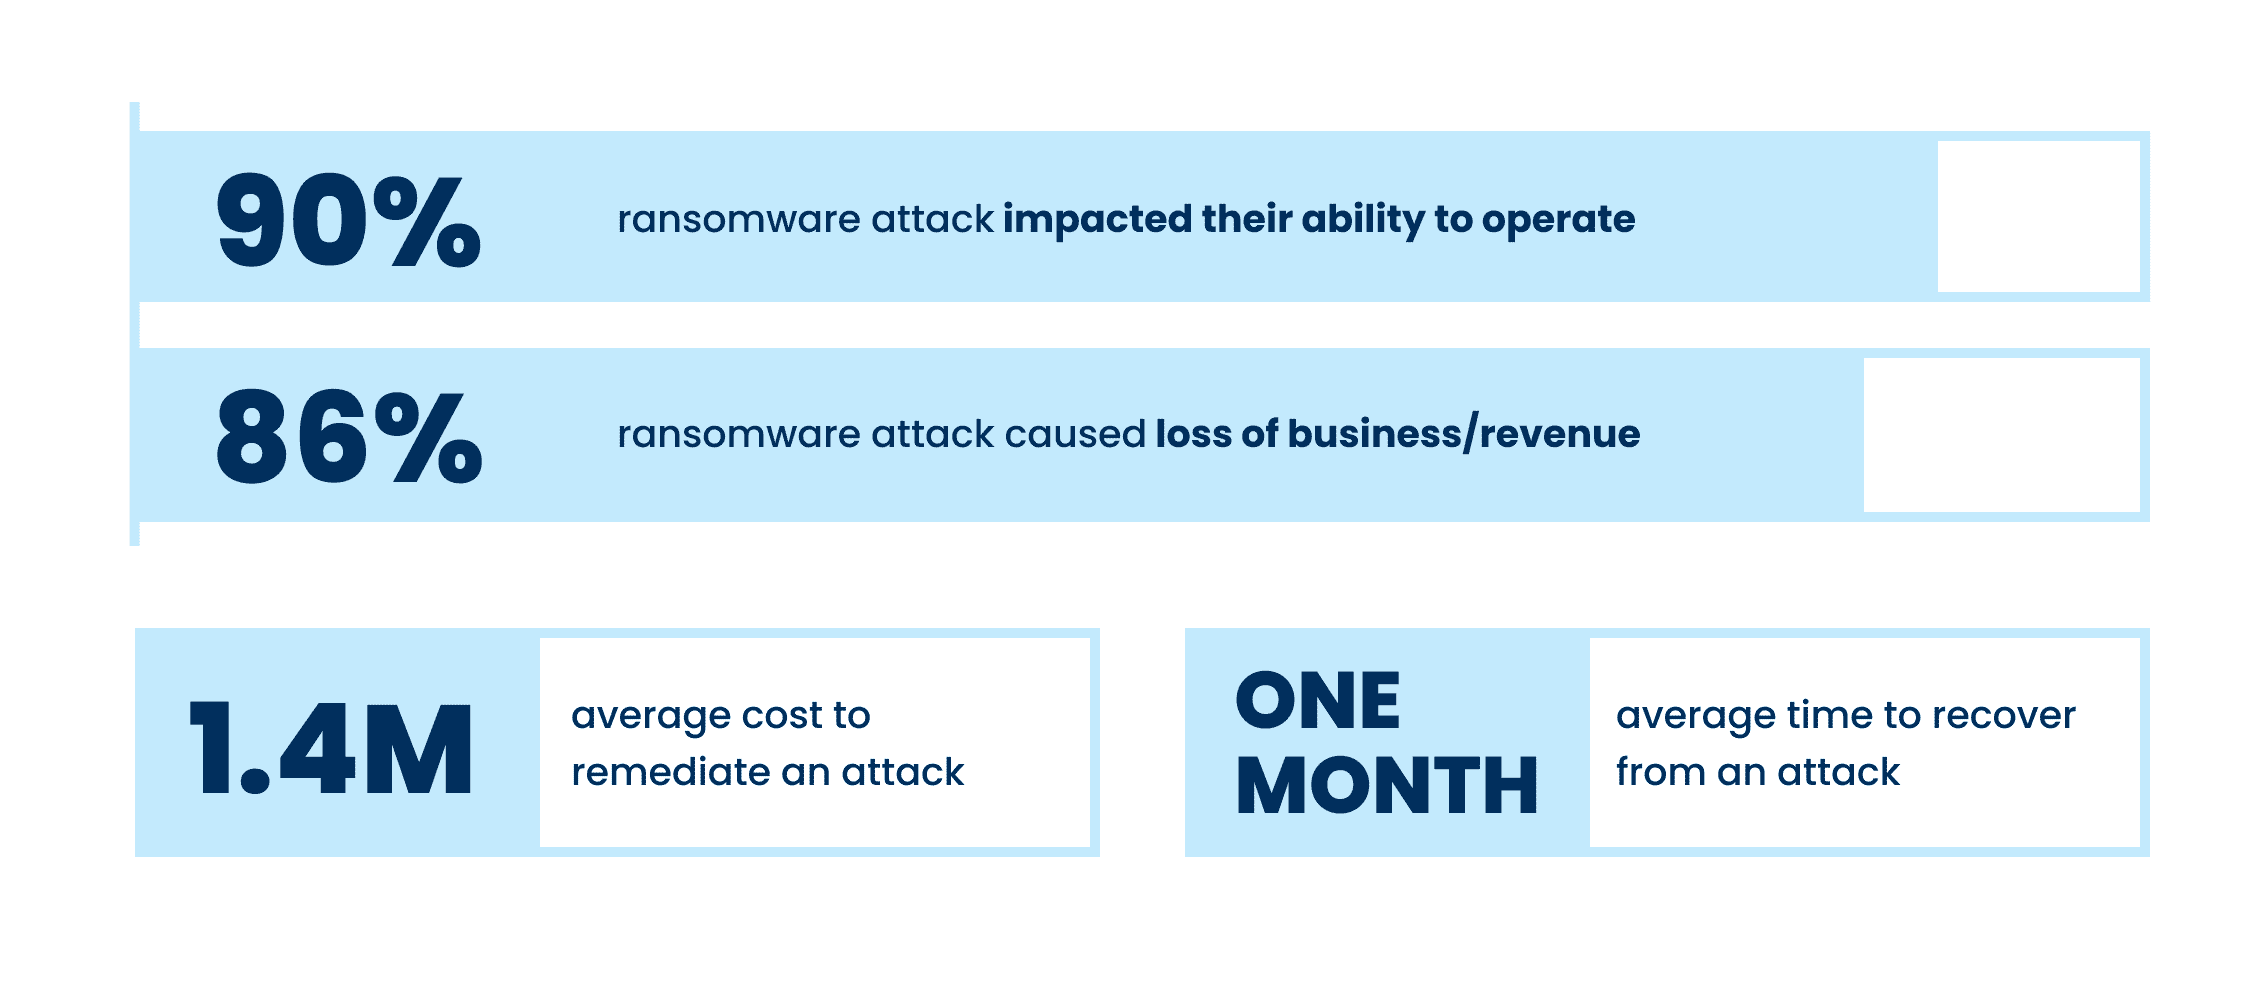 The business impact of ransomware